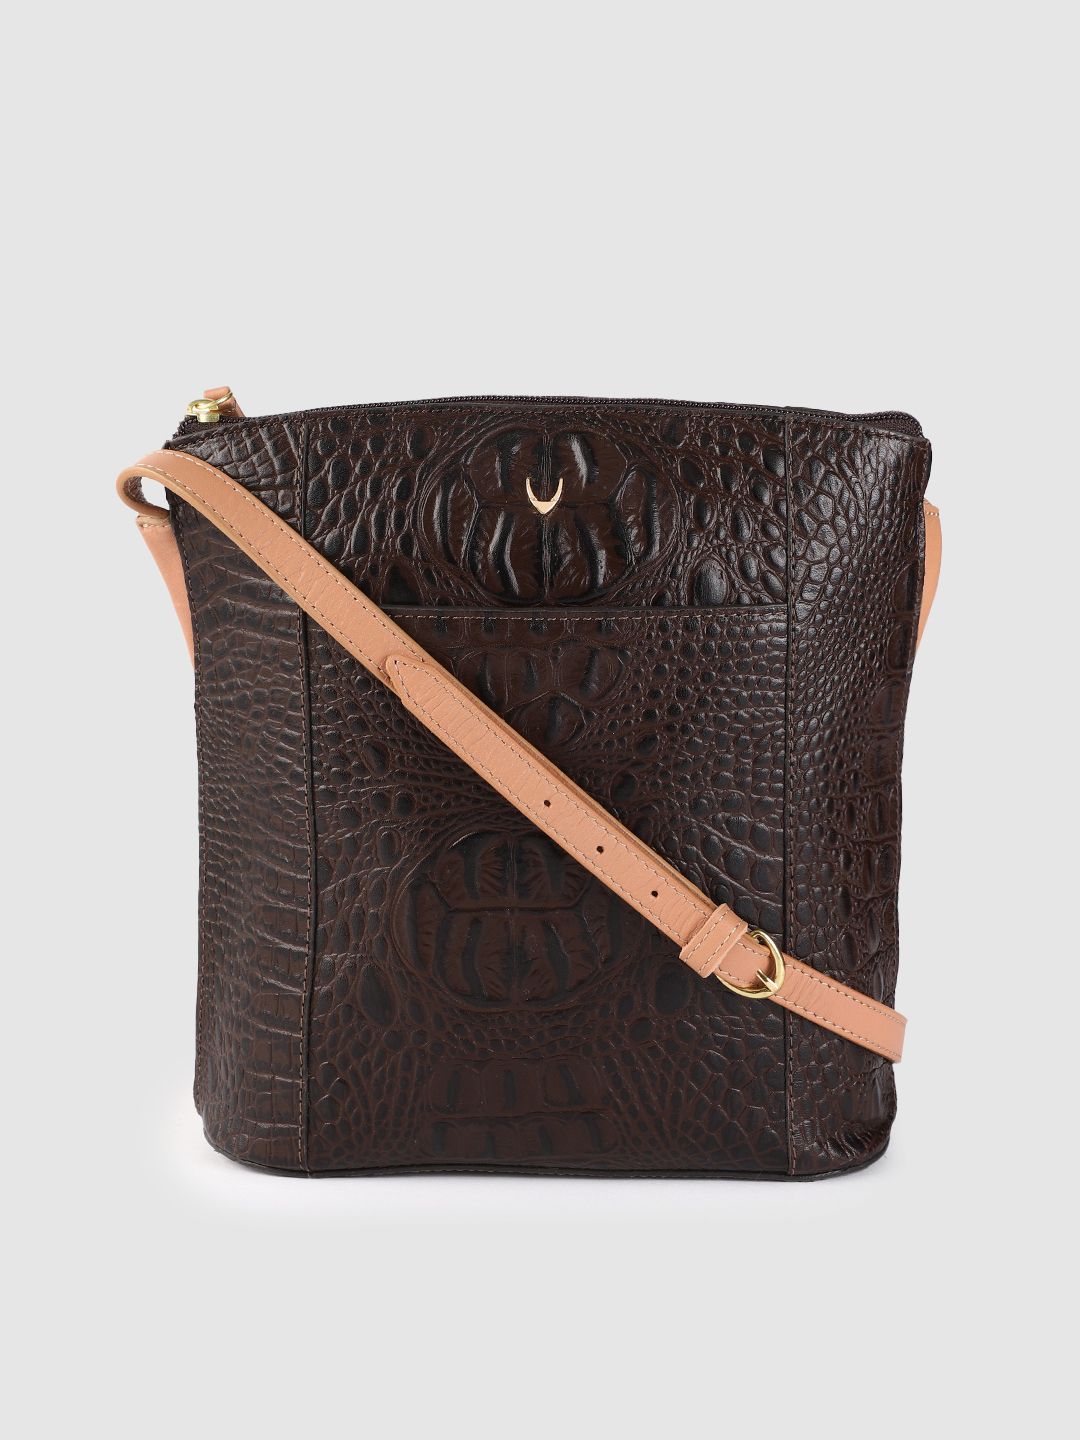 Hidesign Brown Textured Leather Structured Shoulder Bag Price in India